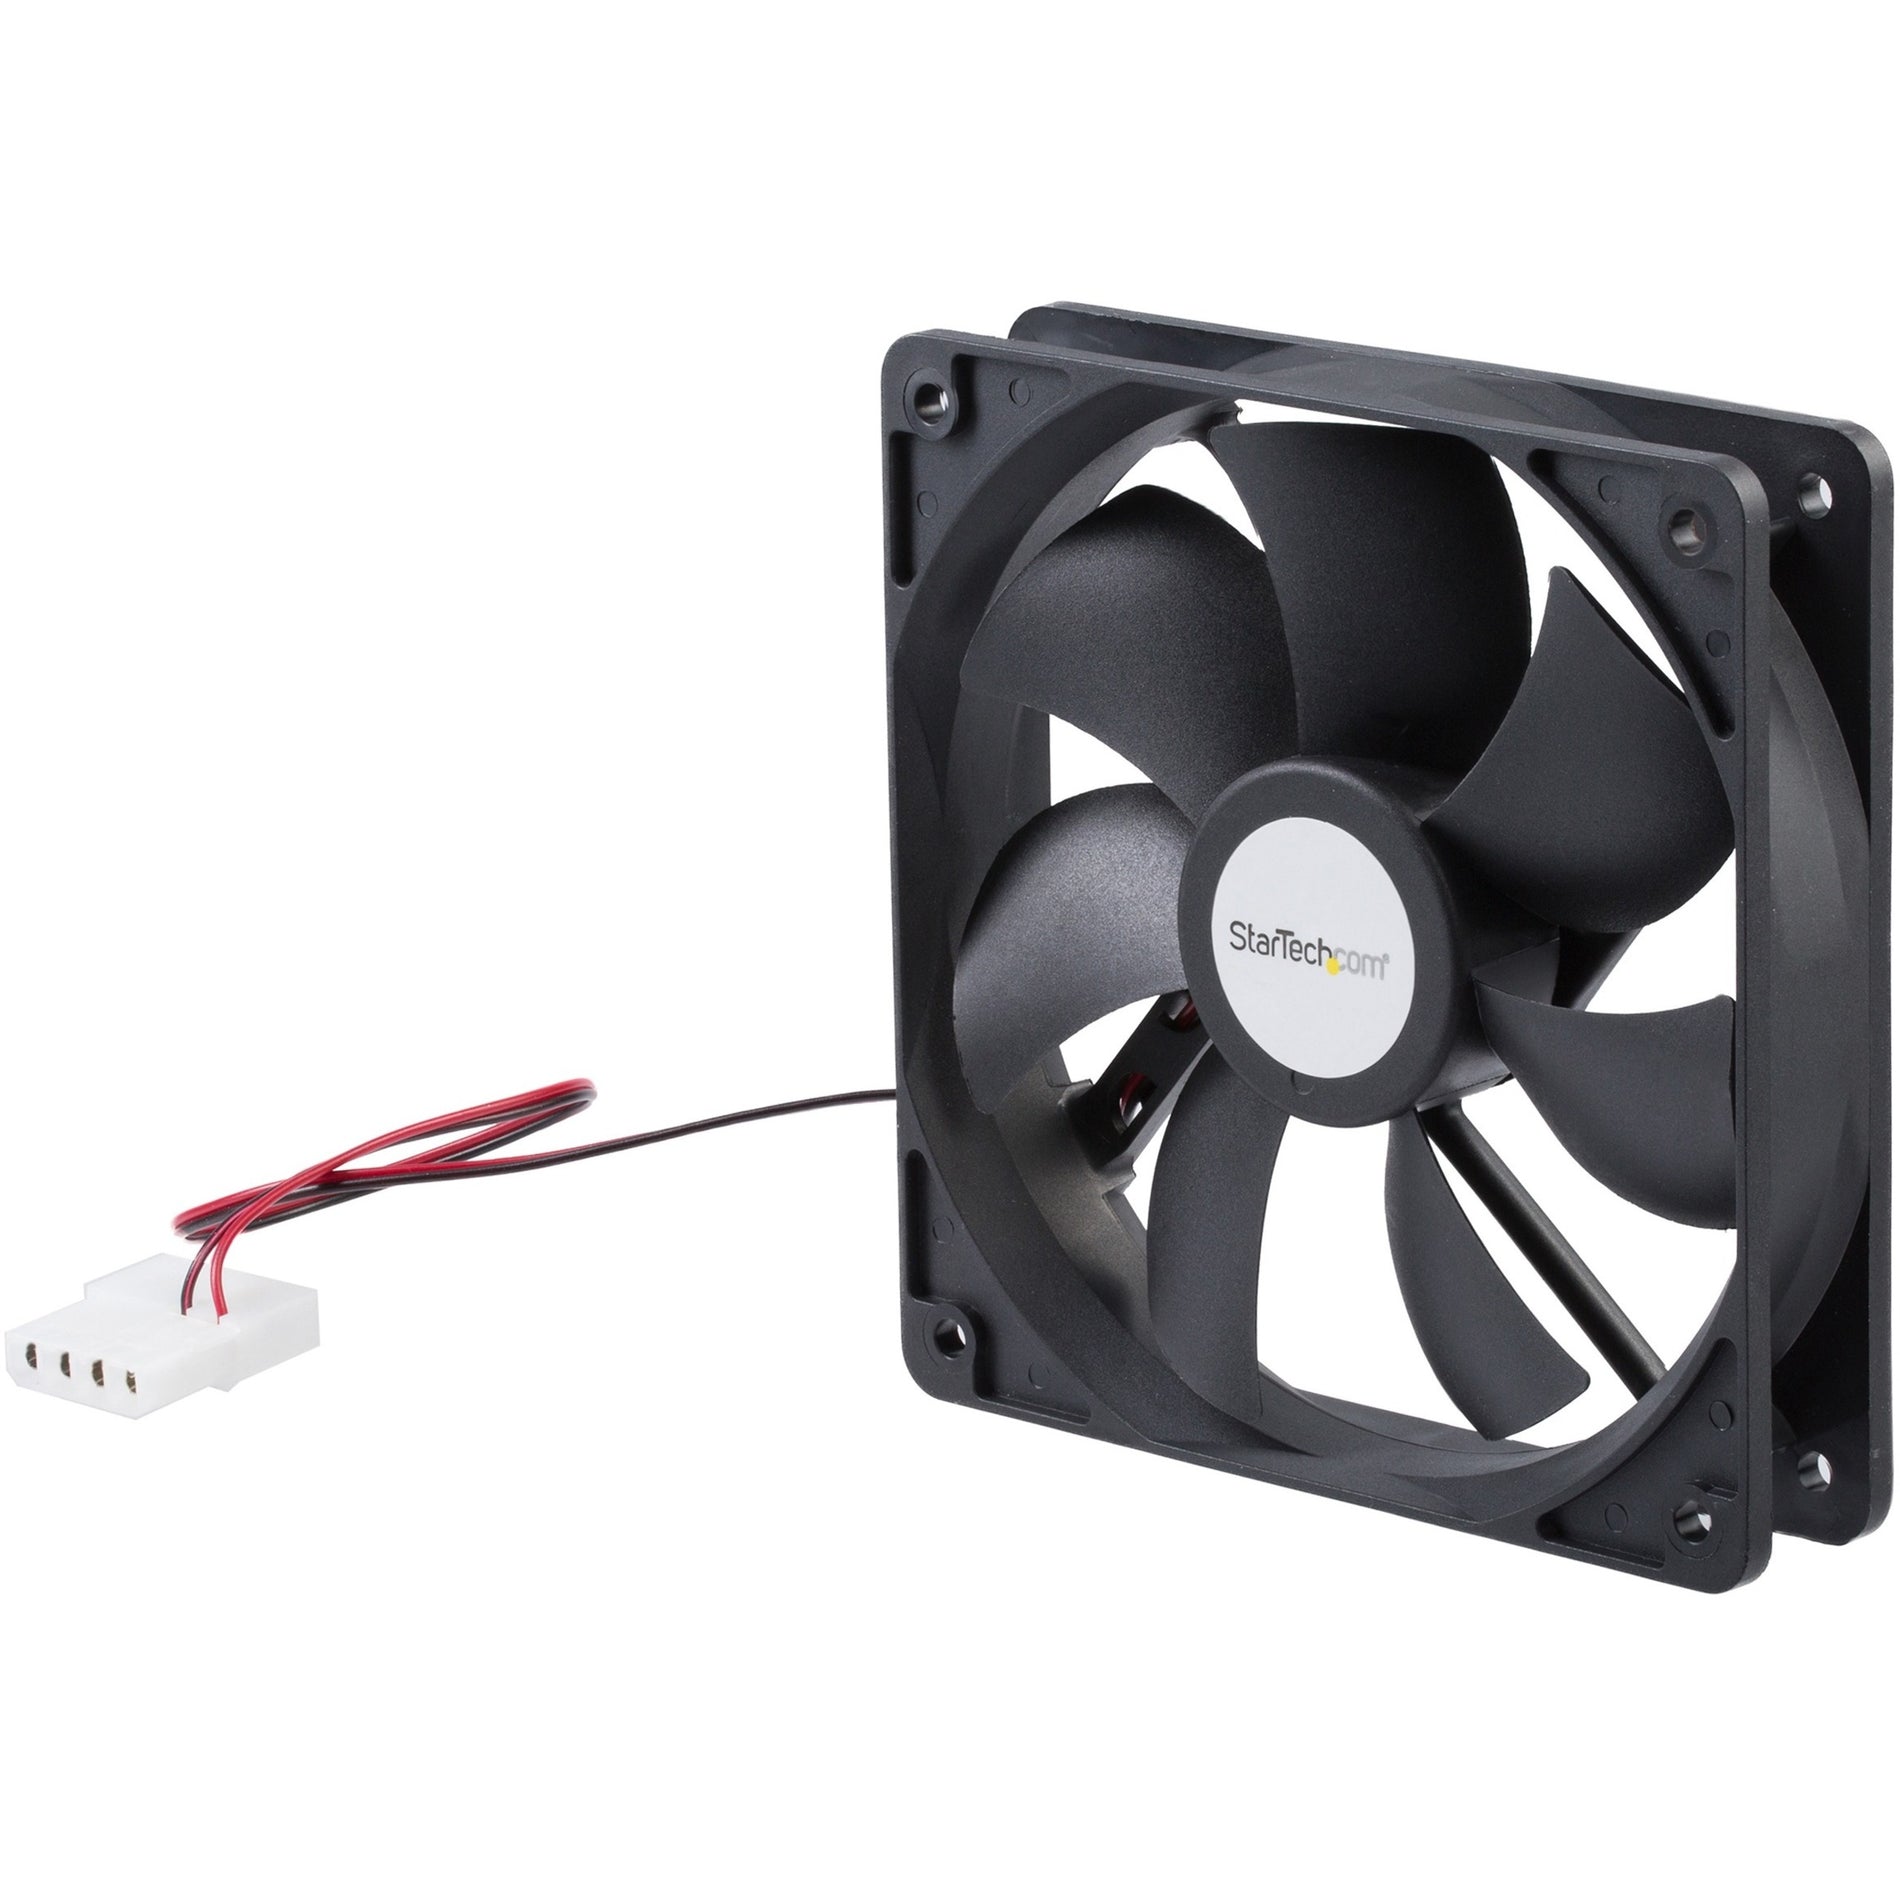 StarTech.com FANBOX12 120mm Dual Ball Bearing CPU Case Fan LP4, Reliable Cooling for Your PC Case